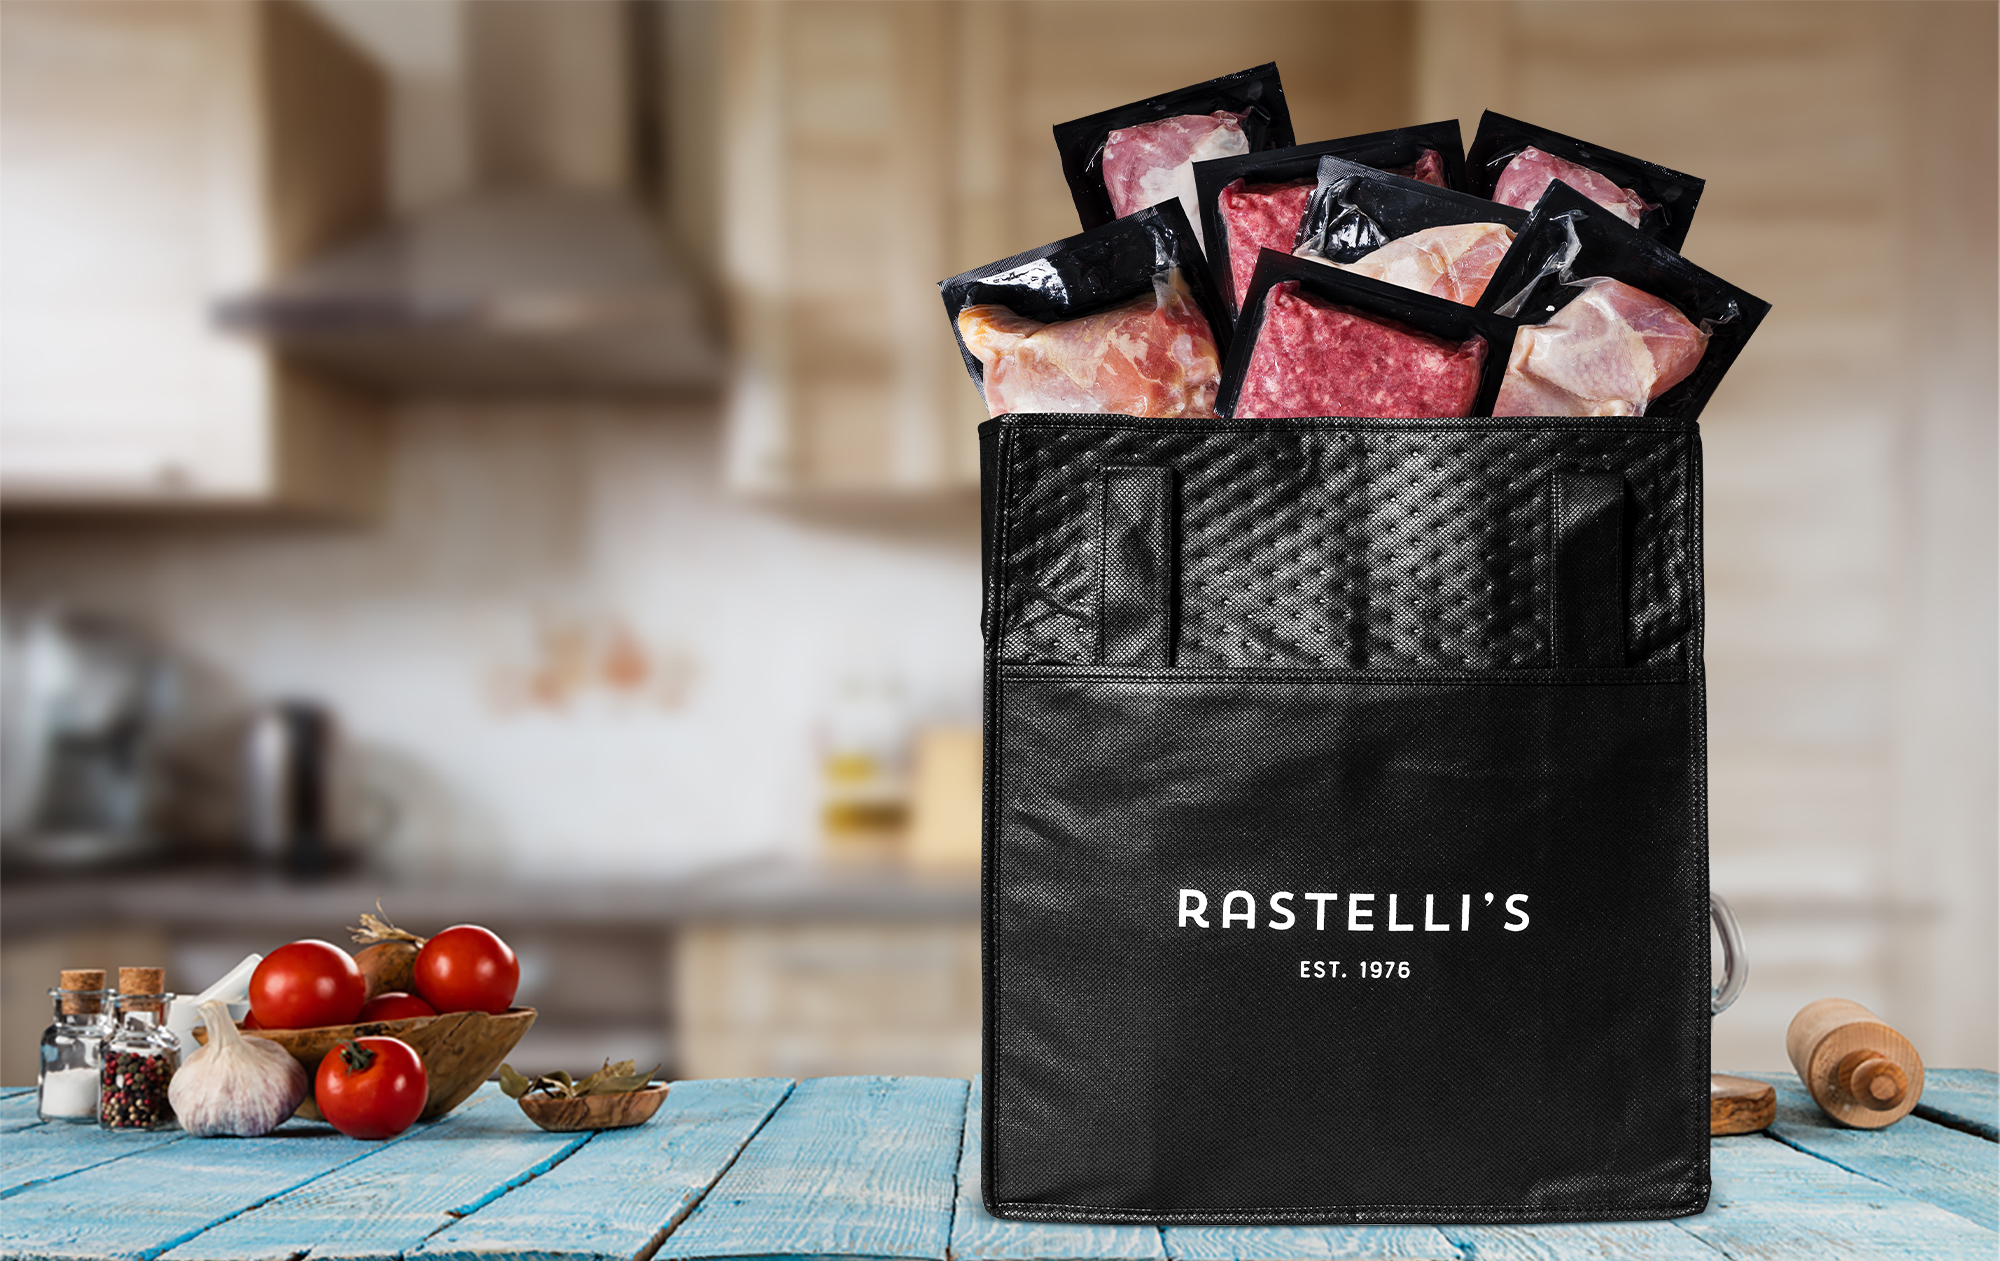 Kick off Summer With Farm to Butcher to Table Meats From Rastelli’s